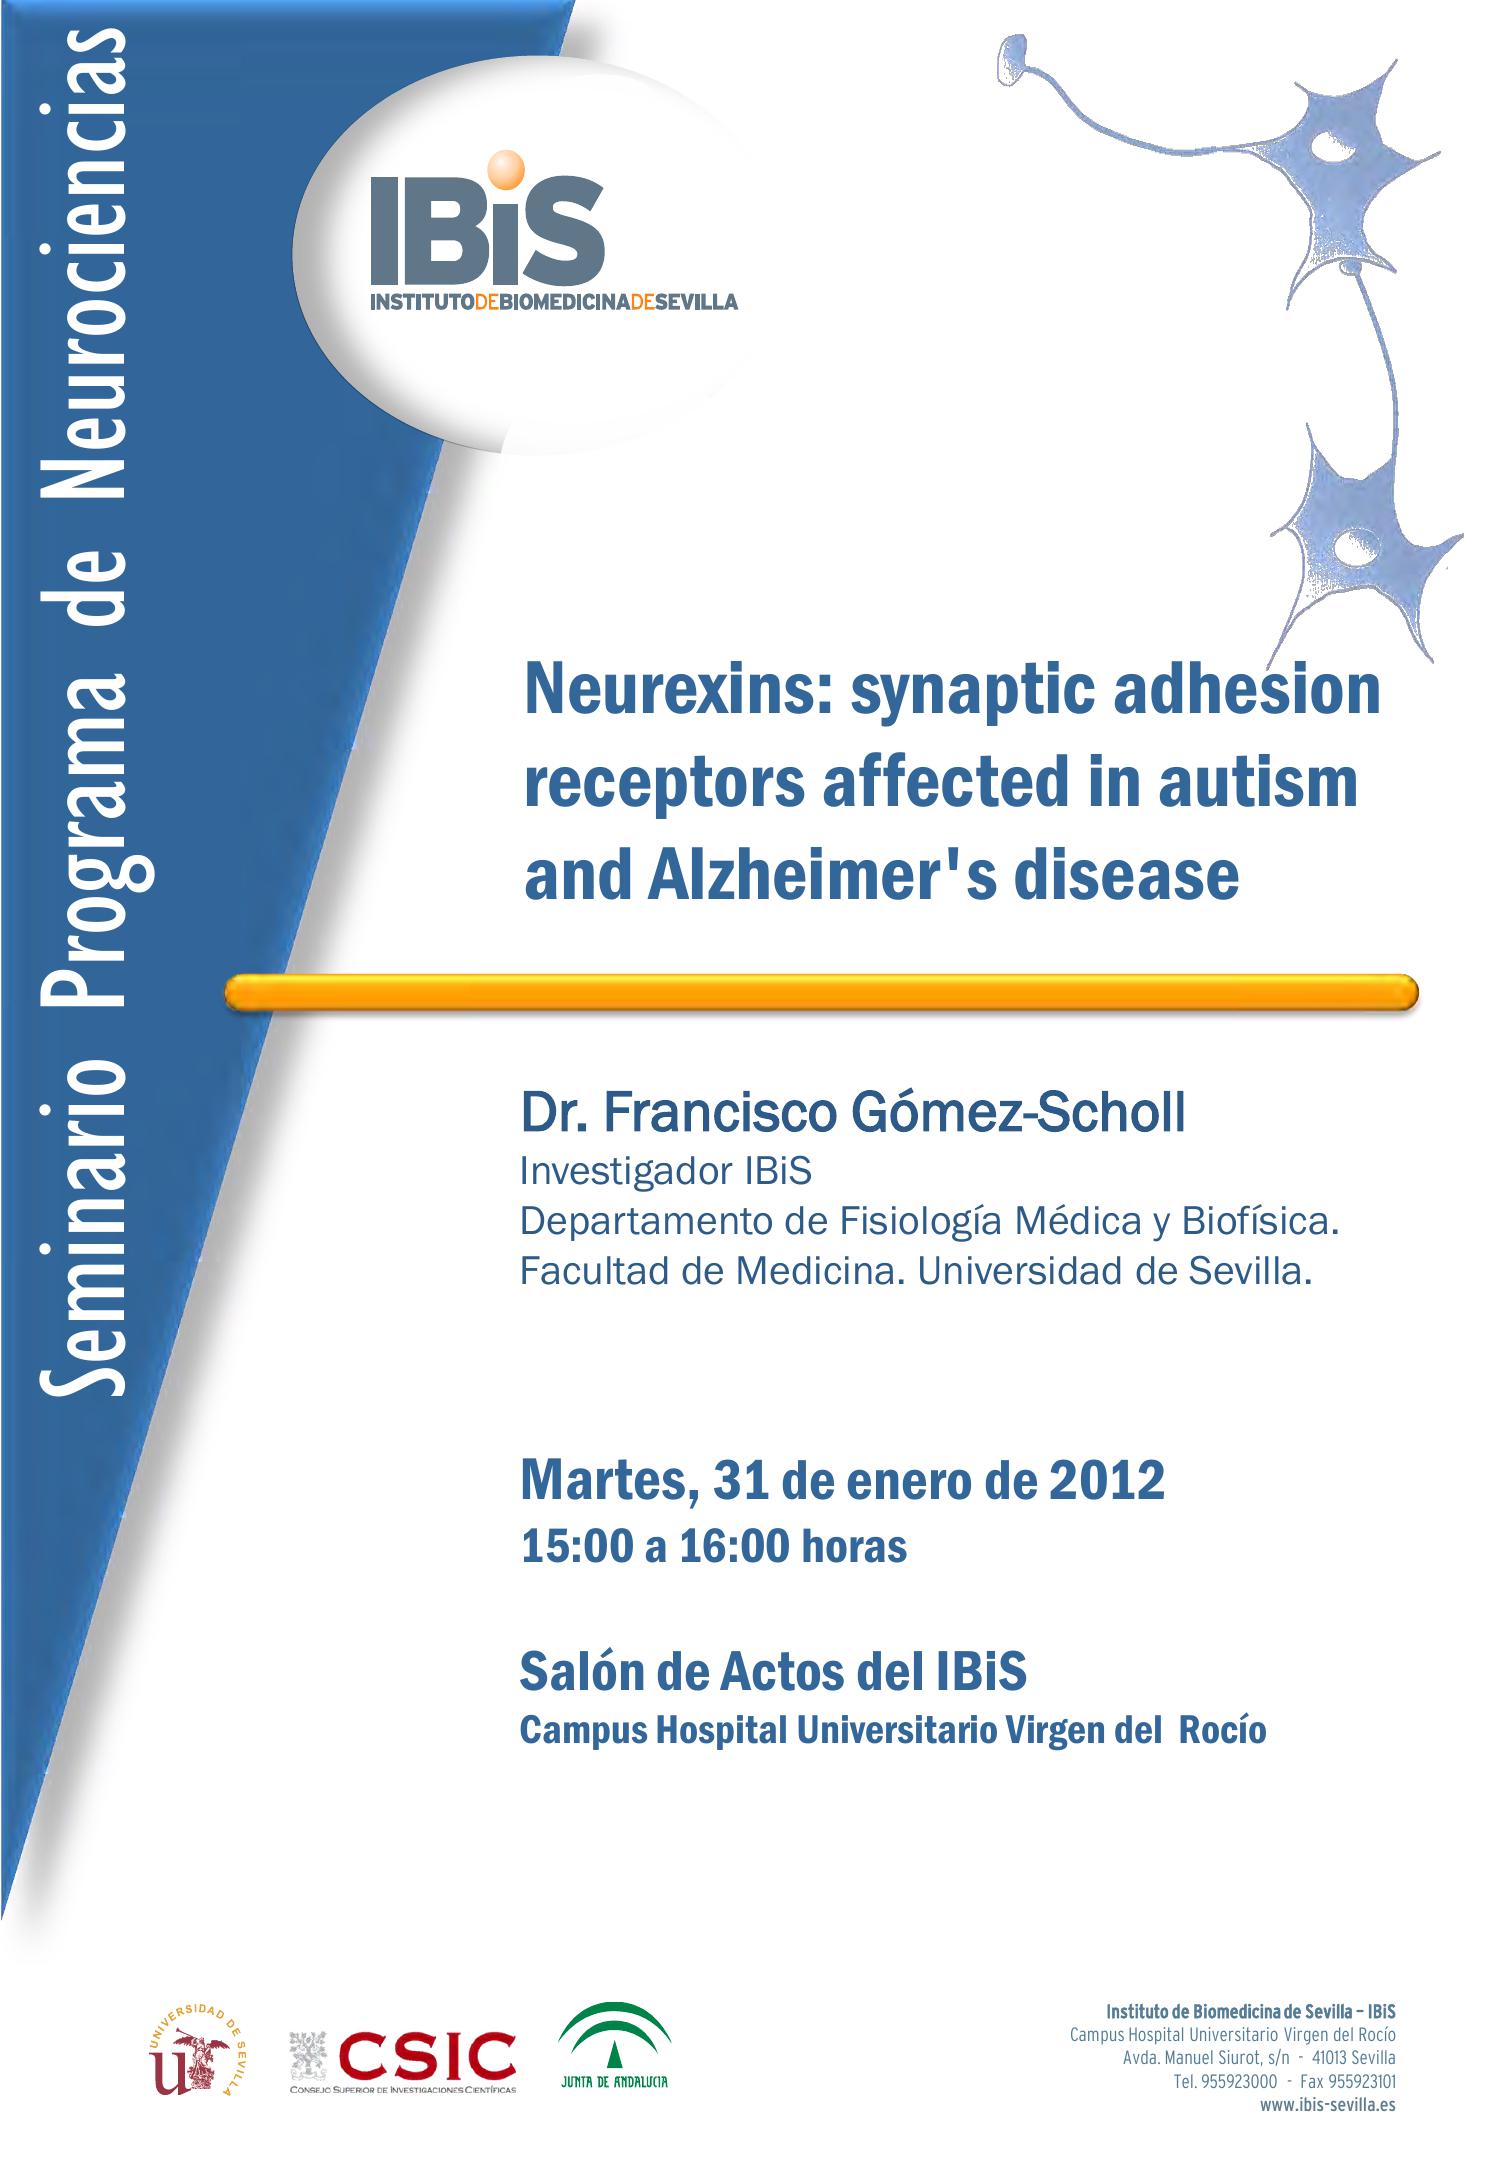 Poster: Neurexins: synaptic adhesion receptors affected in autism and Alzheimer's disease